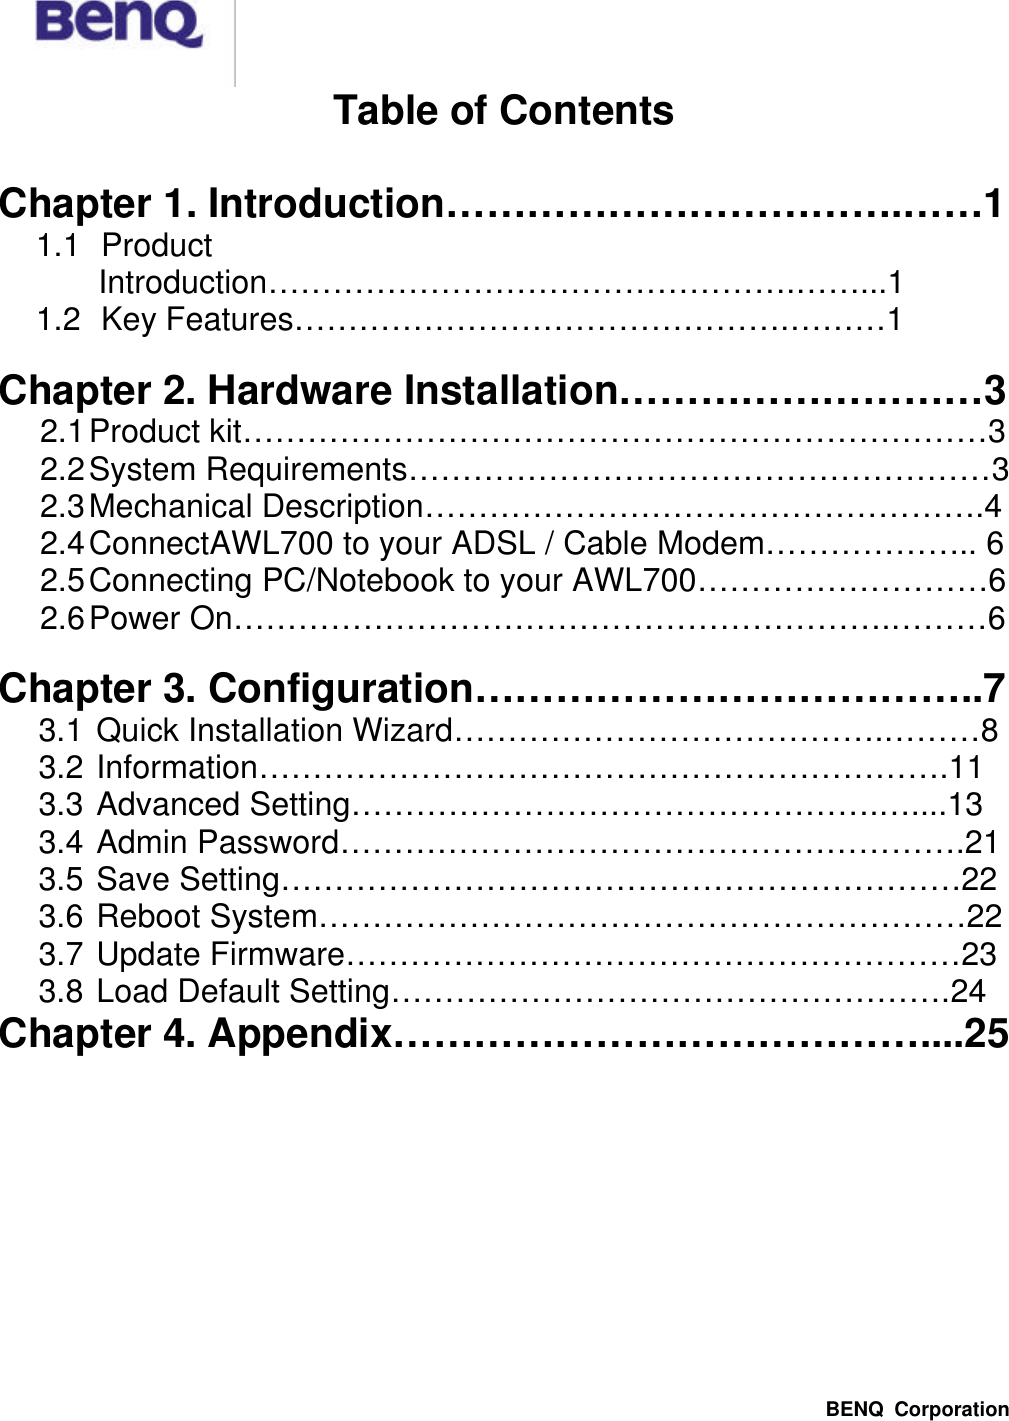  BENQ Corporation Table of Contents  Chapter 1. Introduction…………………………….……1 1.1 Product Introduction………………………………………….……...1 1.2 Key Features……………………………………….………1  Chapter 2. Hardware Installation………………………3 2.1 Product kit……………………………………………………………3 2.2 System Requirements………………………………………………3 2.3 Mechanical Description…………………………………………….4 2.4 ConnectAWL700 to your ADSL / Cable Modem……………….. 6 2.5 Connecting PC/Notebook to your AWL700………………………6 2.6 Power On…………………………………………………….………6  Chapter 3. Configuration………………………………..7 3.1 Quick Installation Wizard………………………………….………8 3.2 Information……………………………………………………….11 3.3 Advanced Setting………………………………………….…....13 3.4 Admin Password………………………………………………….21 3.5 Save Setting………………………………………………………22 3.6 Reboot System……………………………………………………22 3.7 Update Firmware…………………………………………………23 3.8 Load Default Setting…………………………………………….24 Chapter 4. Appendix…………………………………....25   